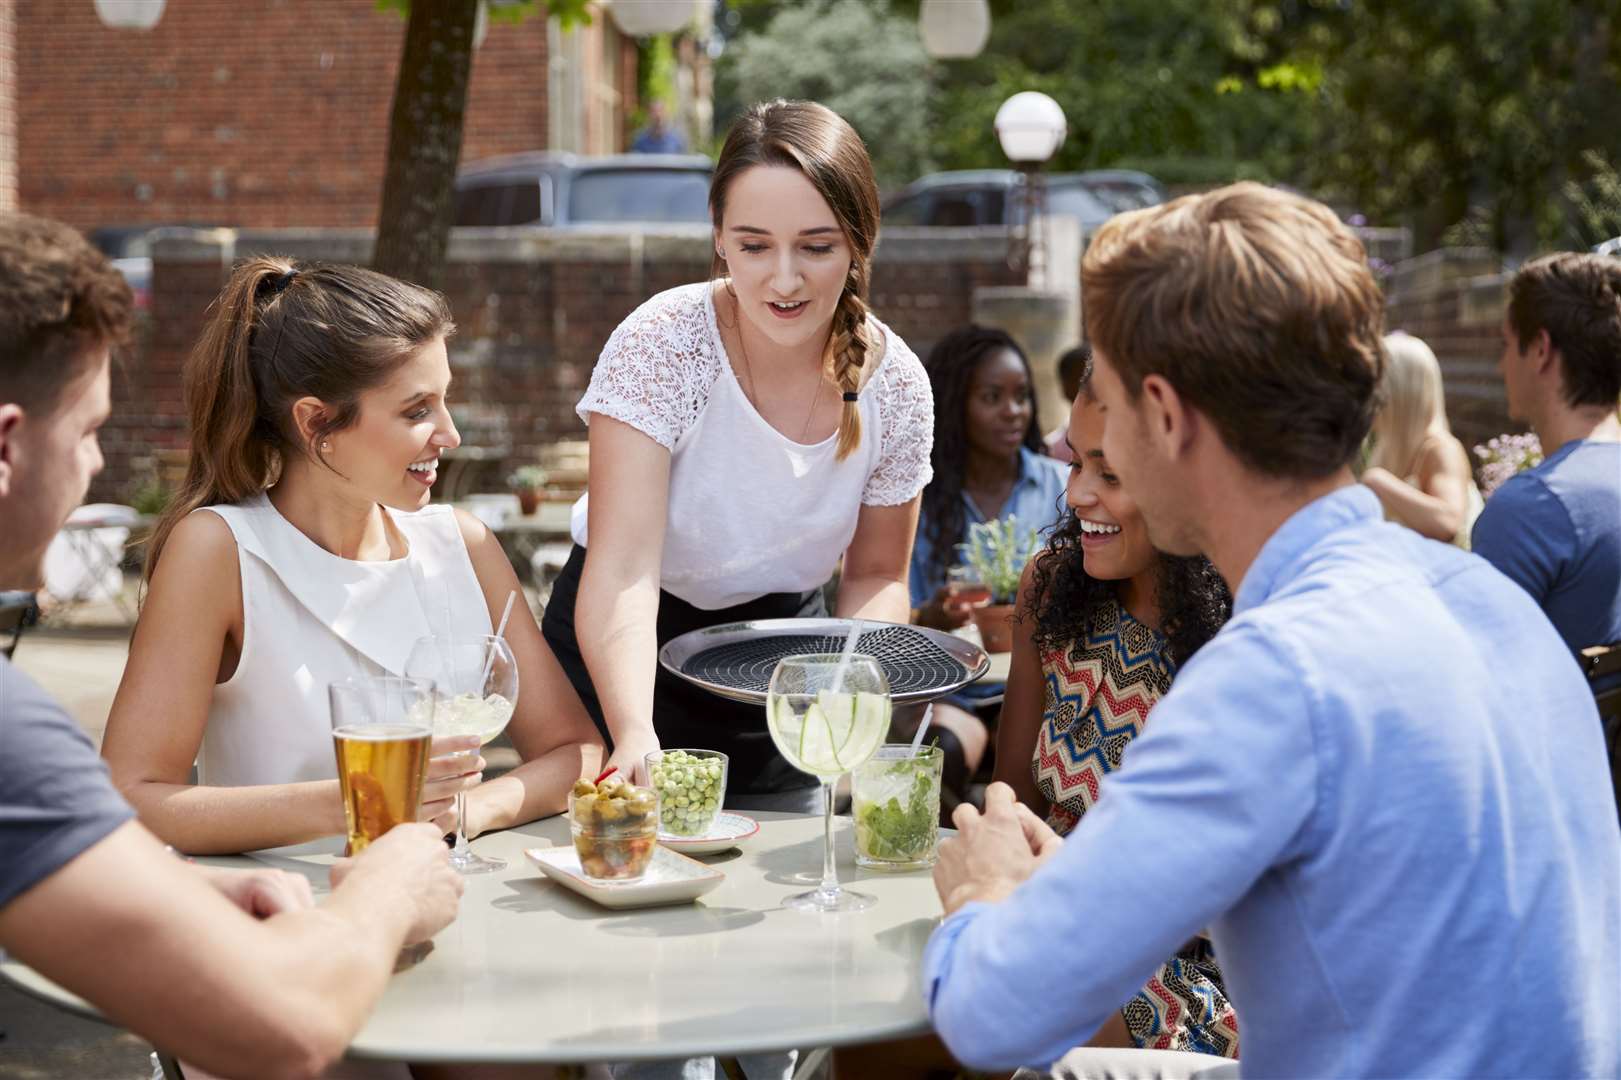 Pubs and restaurants with outdoor spaces will be the first to open.